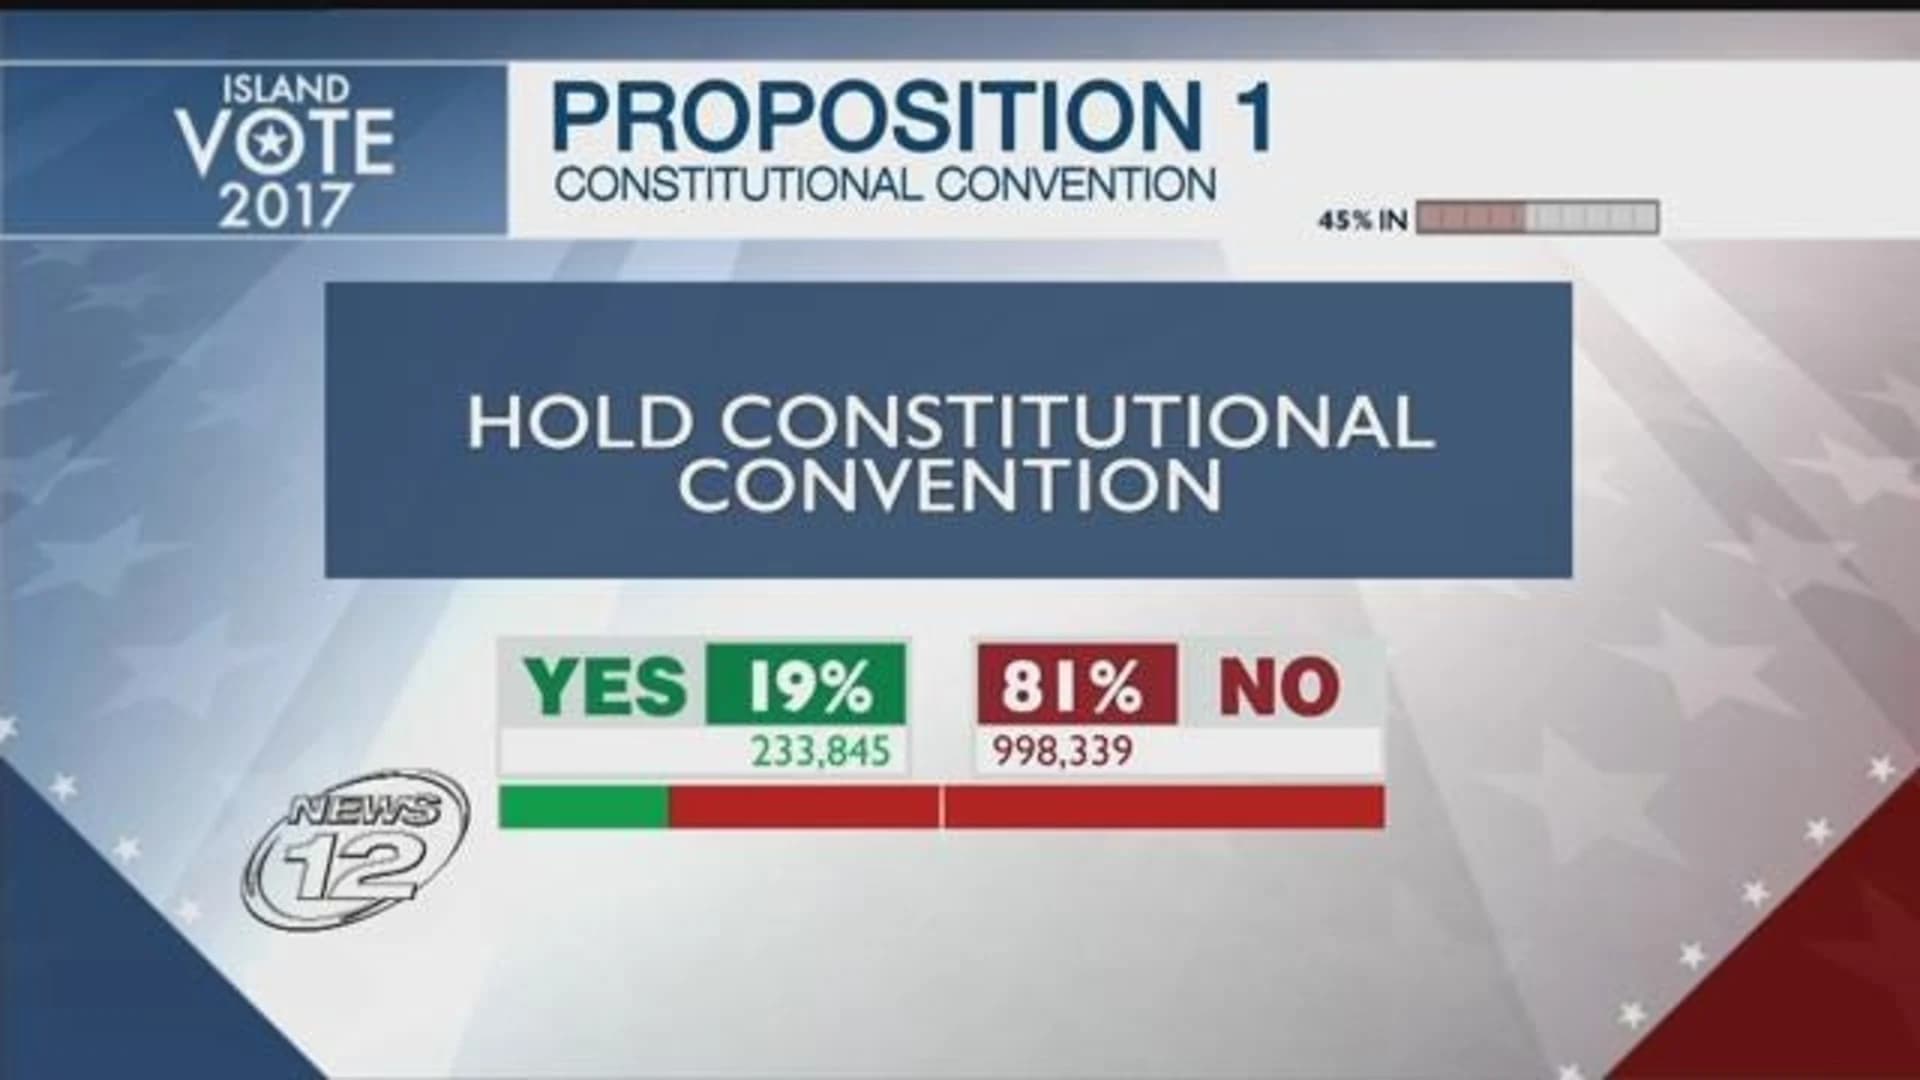 New York voters reject constitutional convention measure